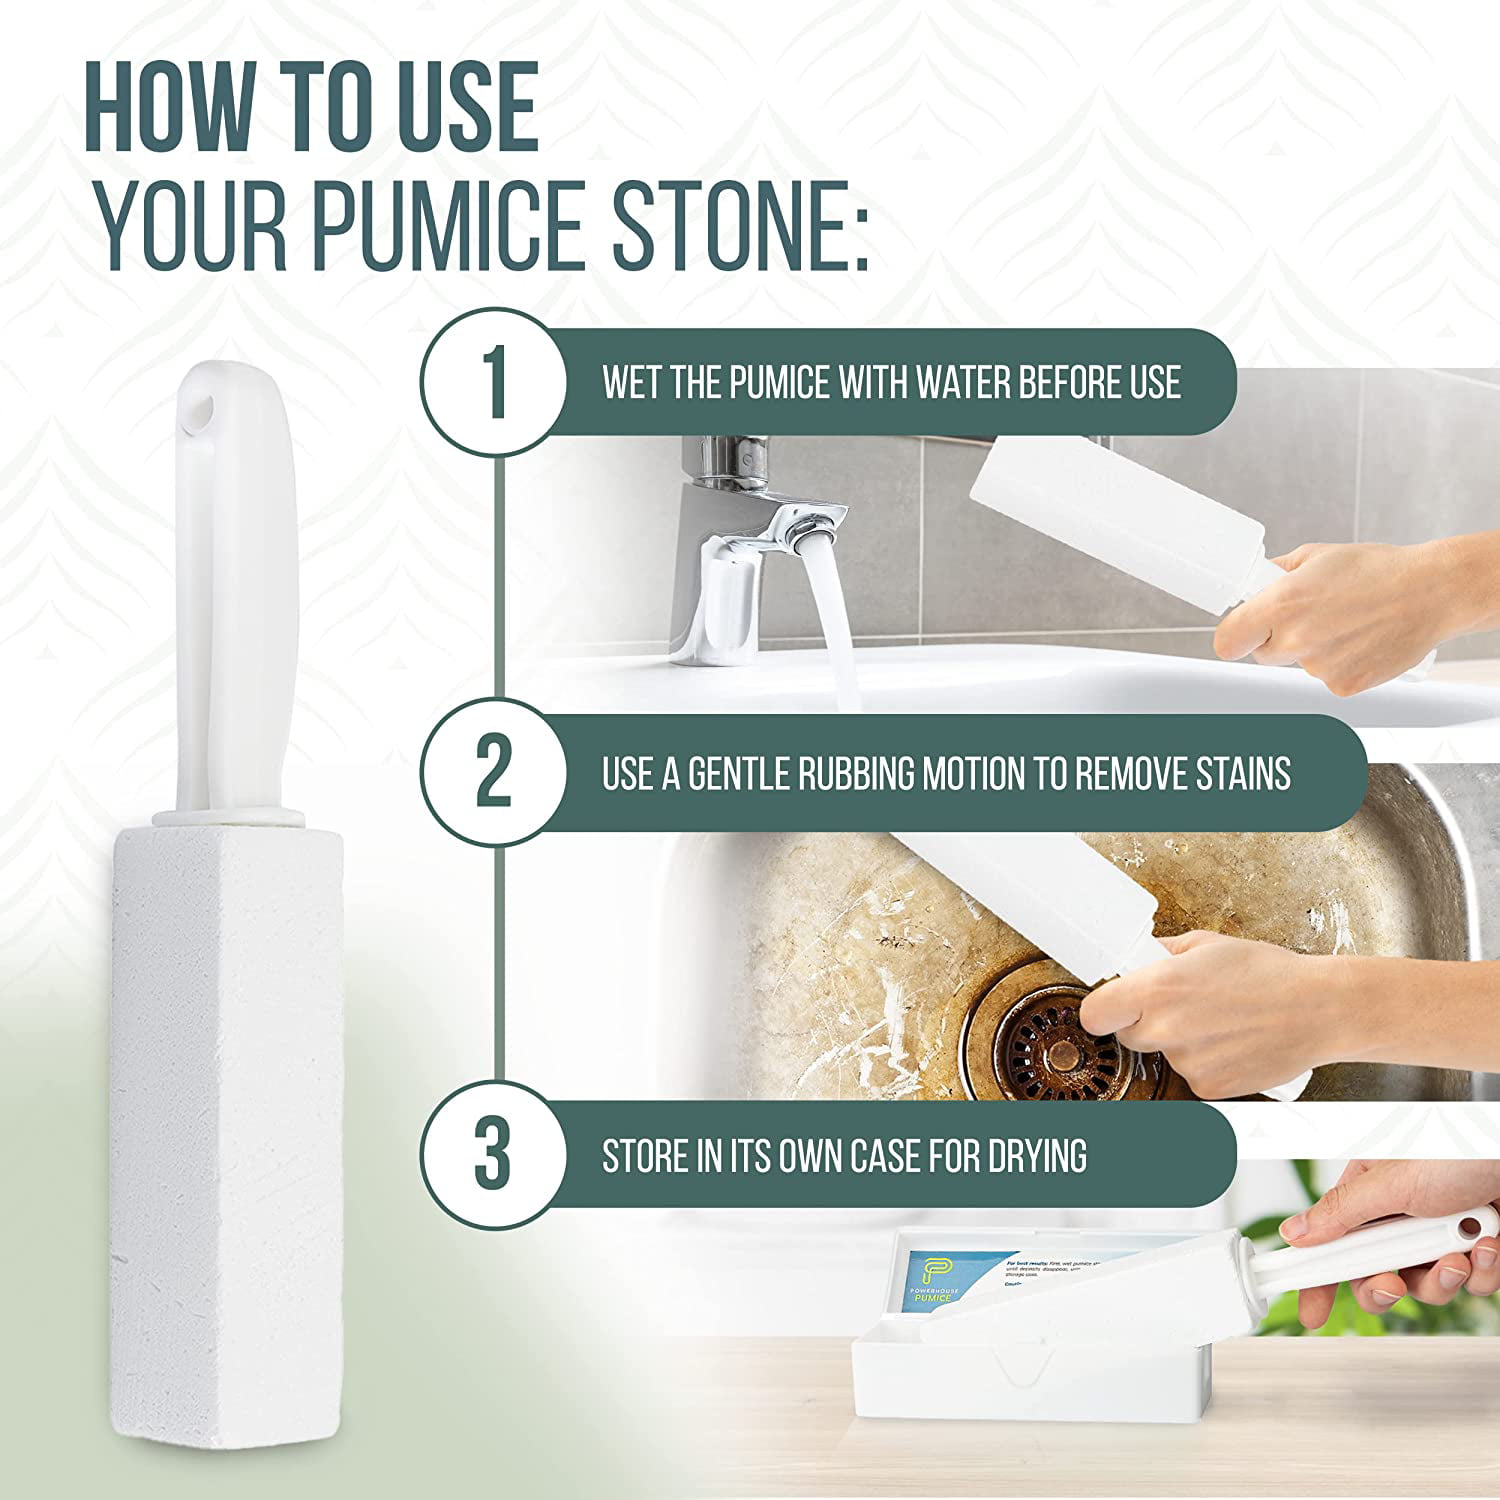 Pumice Stone for Cleaning Fine Grit Sturdy - High Density 12-Pack 